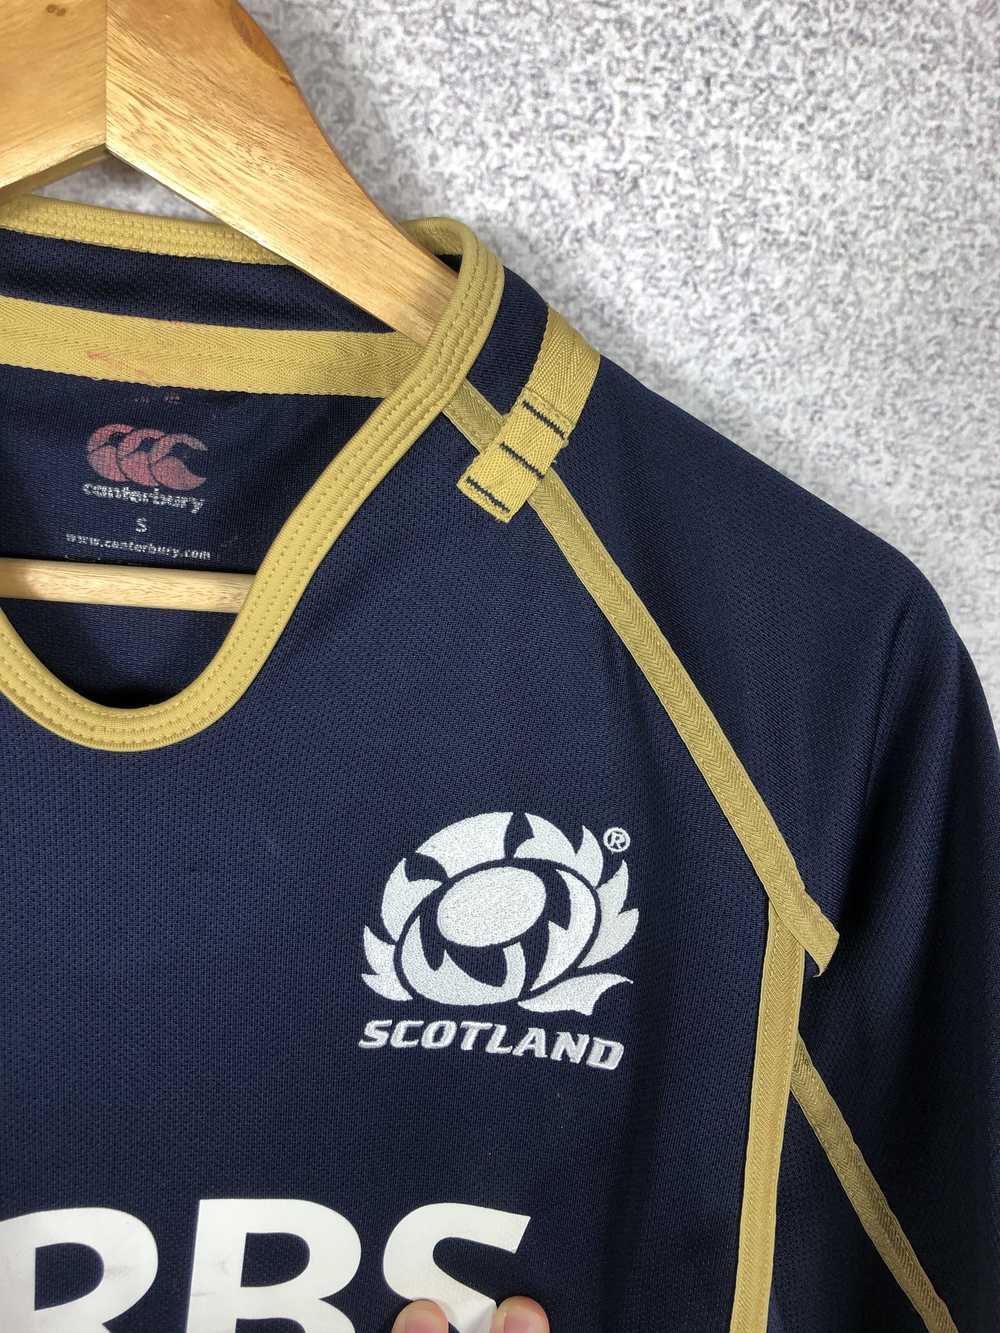 England Rugby League × Jersey × Vintage Vintage S… - image 3